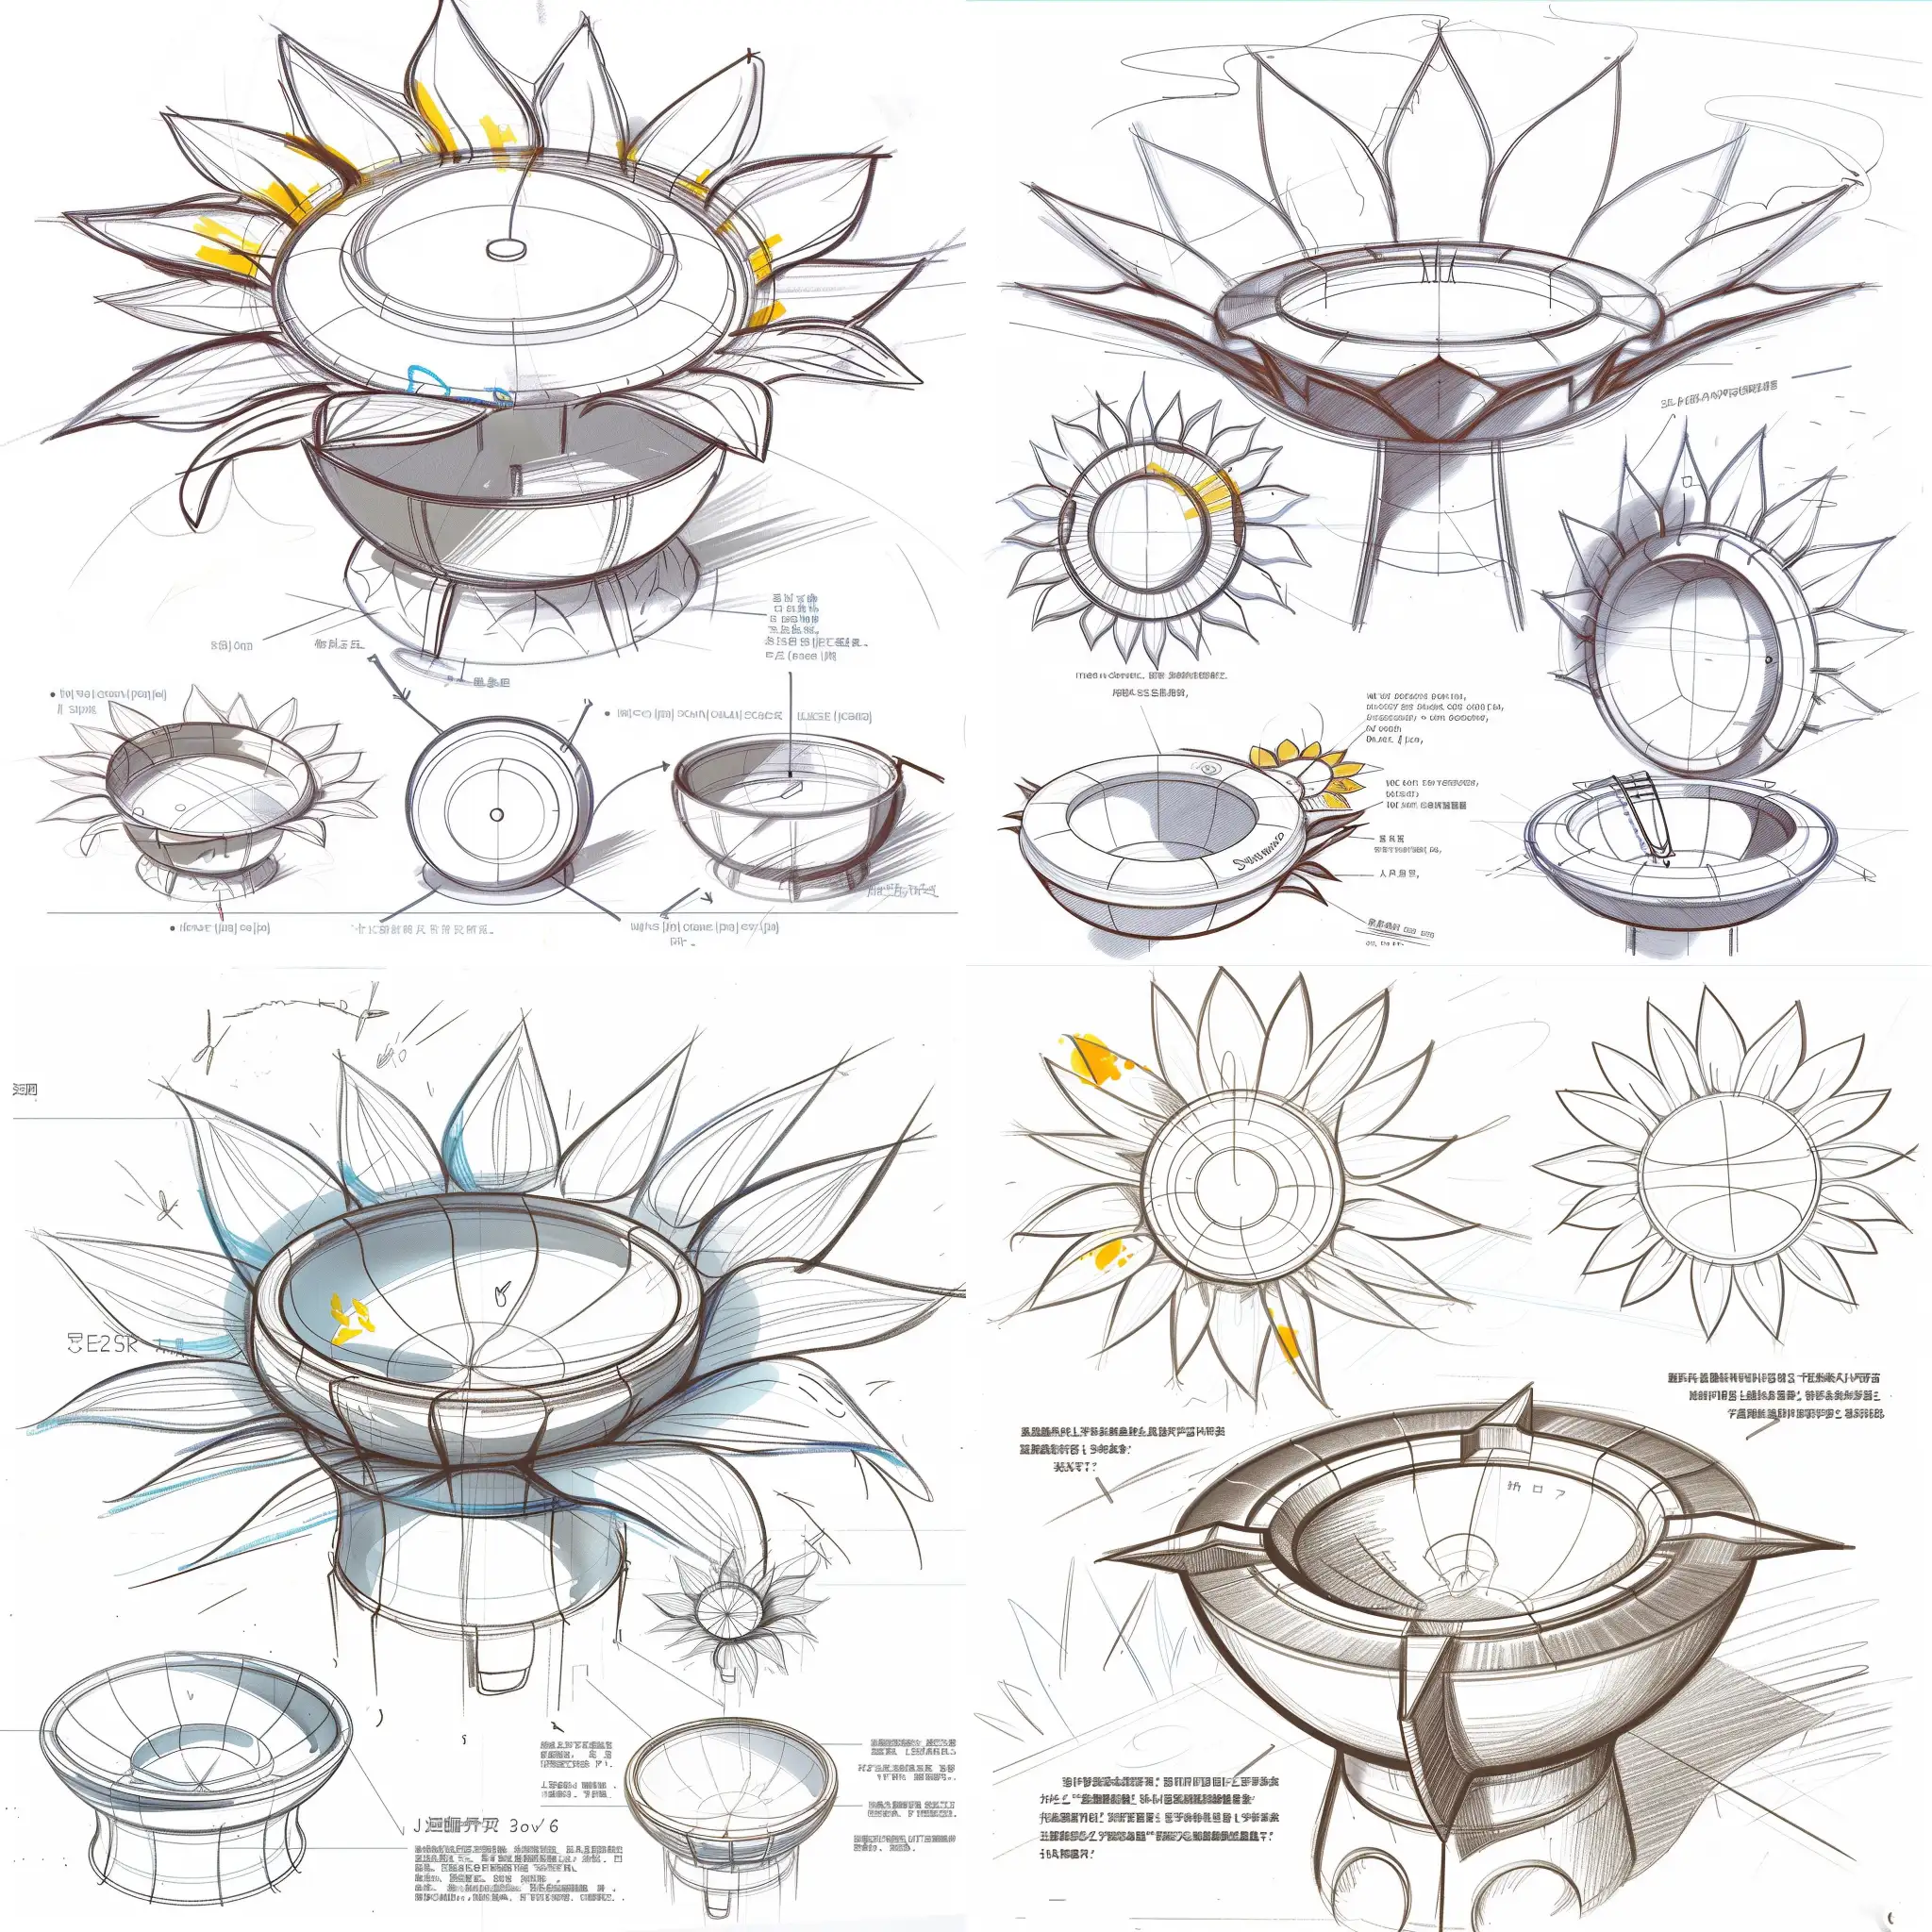 Product design, children's water drive bowl design, small and cute portable, design sketch scheme, hand-drawn sketch, line draft, drawing reference, product design sketch, white background, front view, side view, rear view, drawings from different angles, each scheme should present the modeling source and intention, detailed drawing, explosion diagram, use scene diagram, human-computer interaction diagram, without color
The shape of the sunflower is extracted, not too concrete, you can abstract a little, design children's water insulation bowl, small and cute, product design sketch, simulate the characteristics of sunflower, petals are solar version, usually close to the lid of the bowl, in outdoor use, separated from the bowl cover, spread into a ring, absorb solar energy, auxiliary insulation cute and round, easy to carry